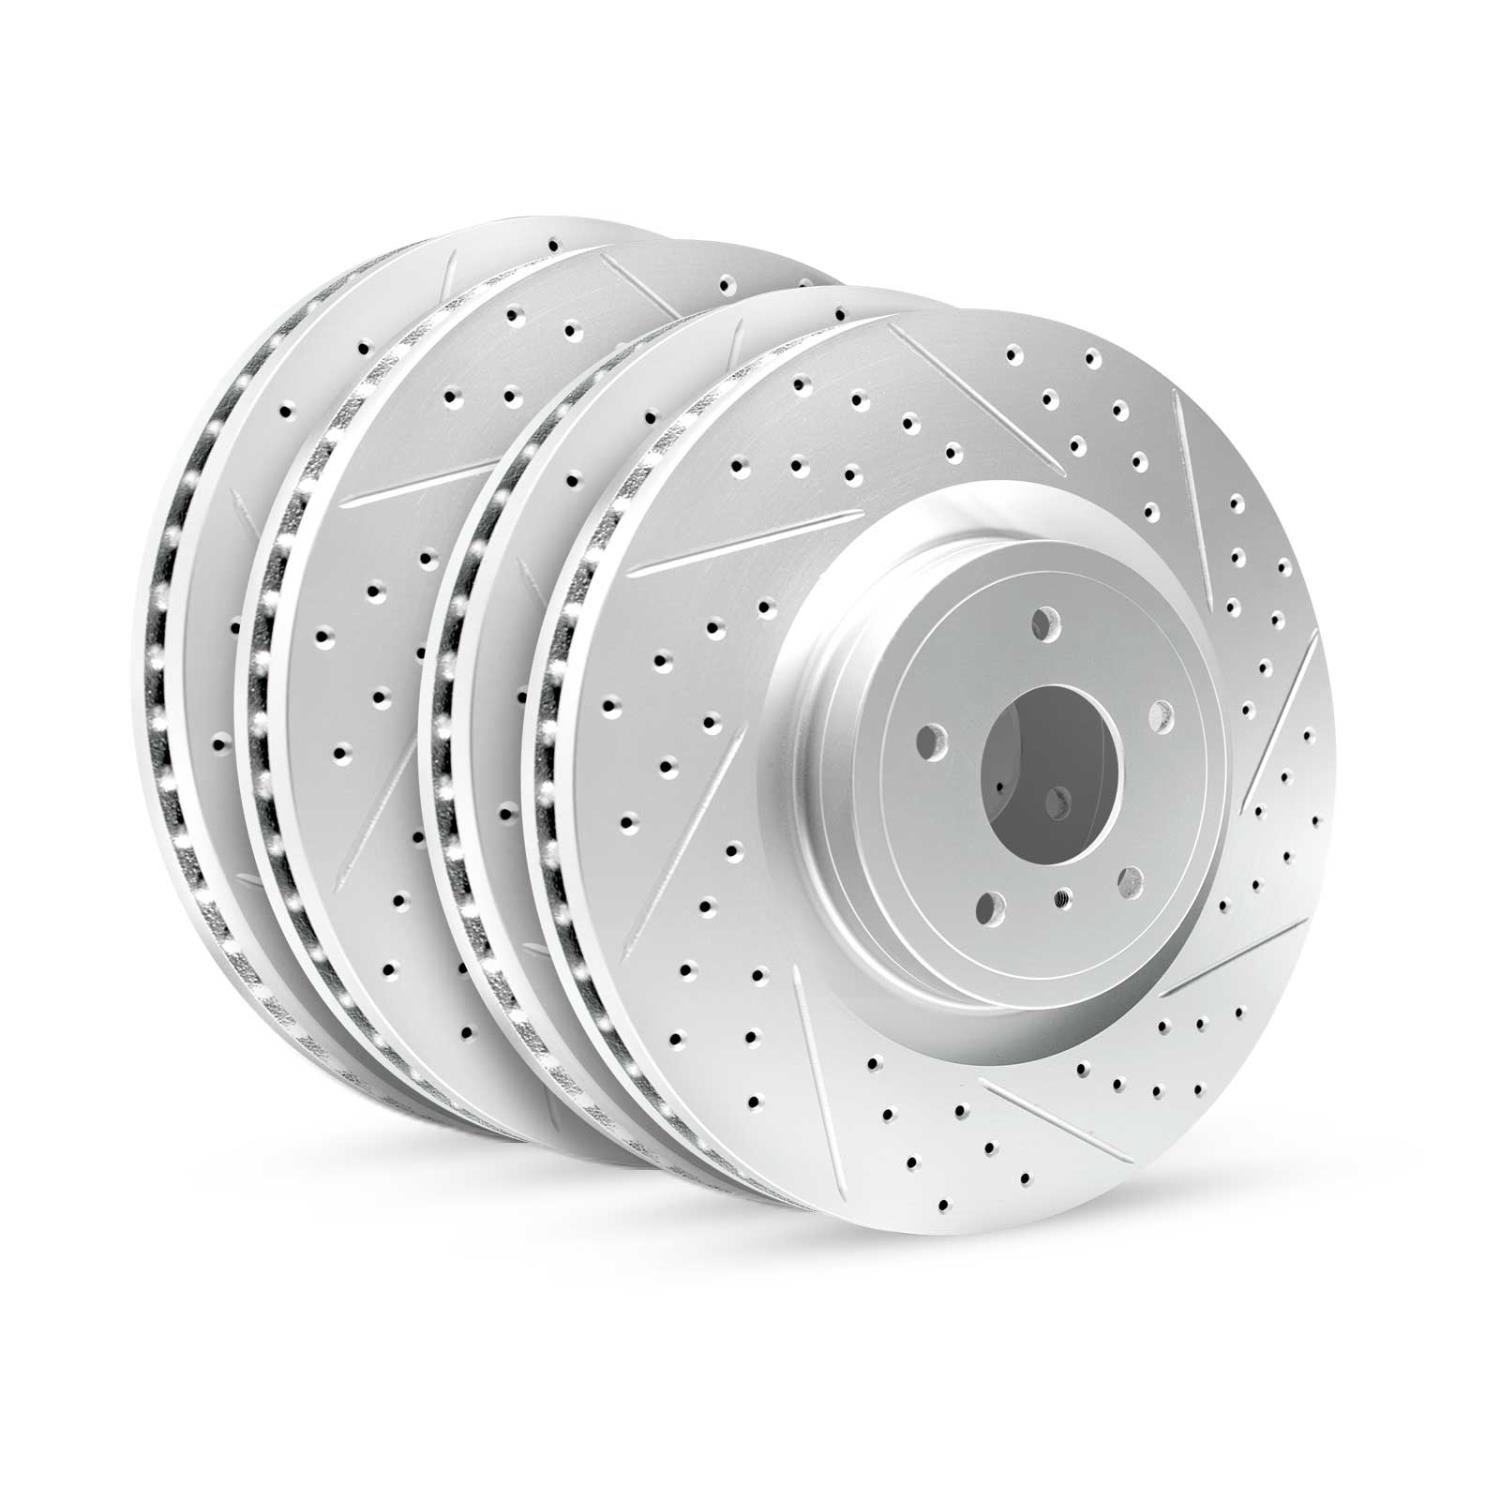 GEO-Carbon Drilled/Slotted Rotors, 2009-2009 Ford/Mazda,